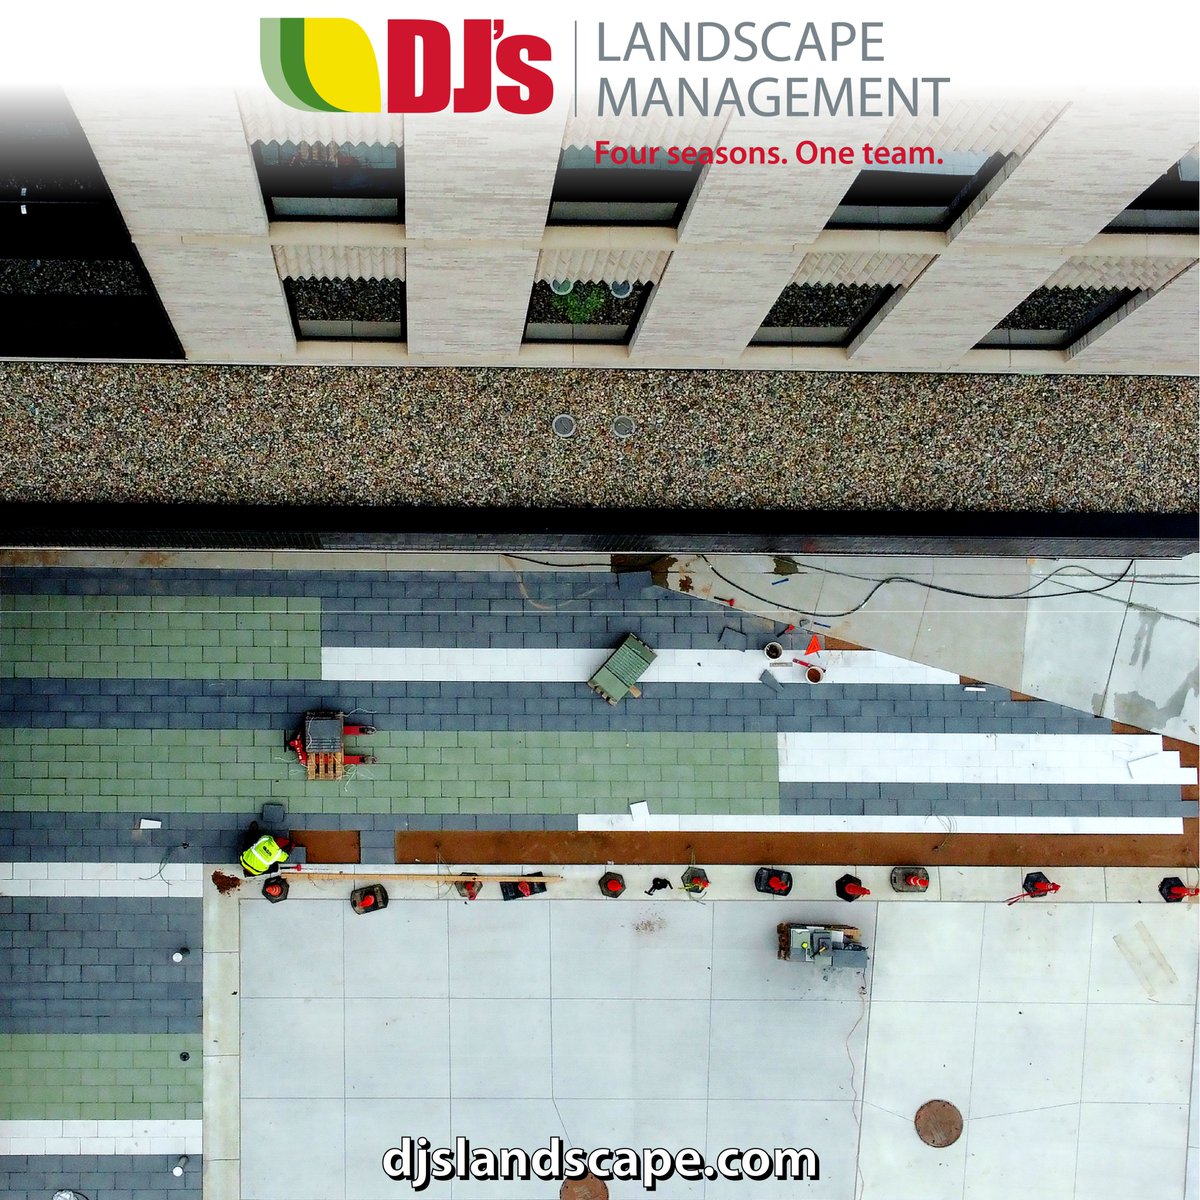 #TeamDJ #GrandRapids has been busy with the paver work this season! Want to join them? djslandscape.com/careers

#hardscapelife